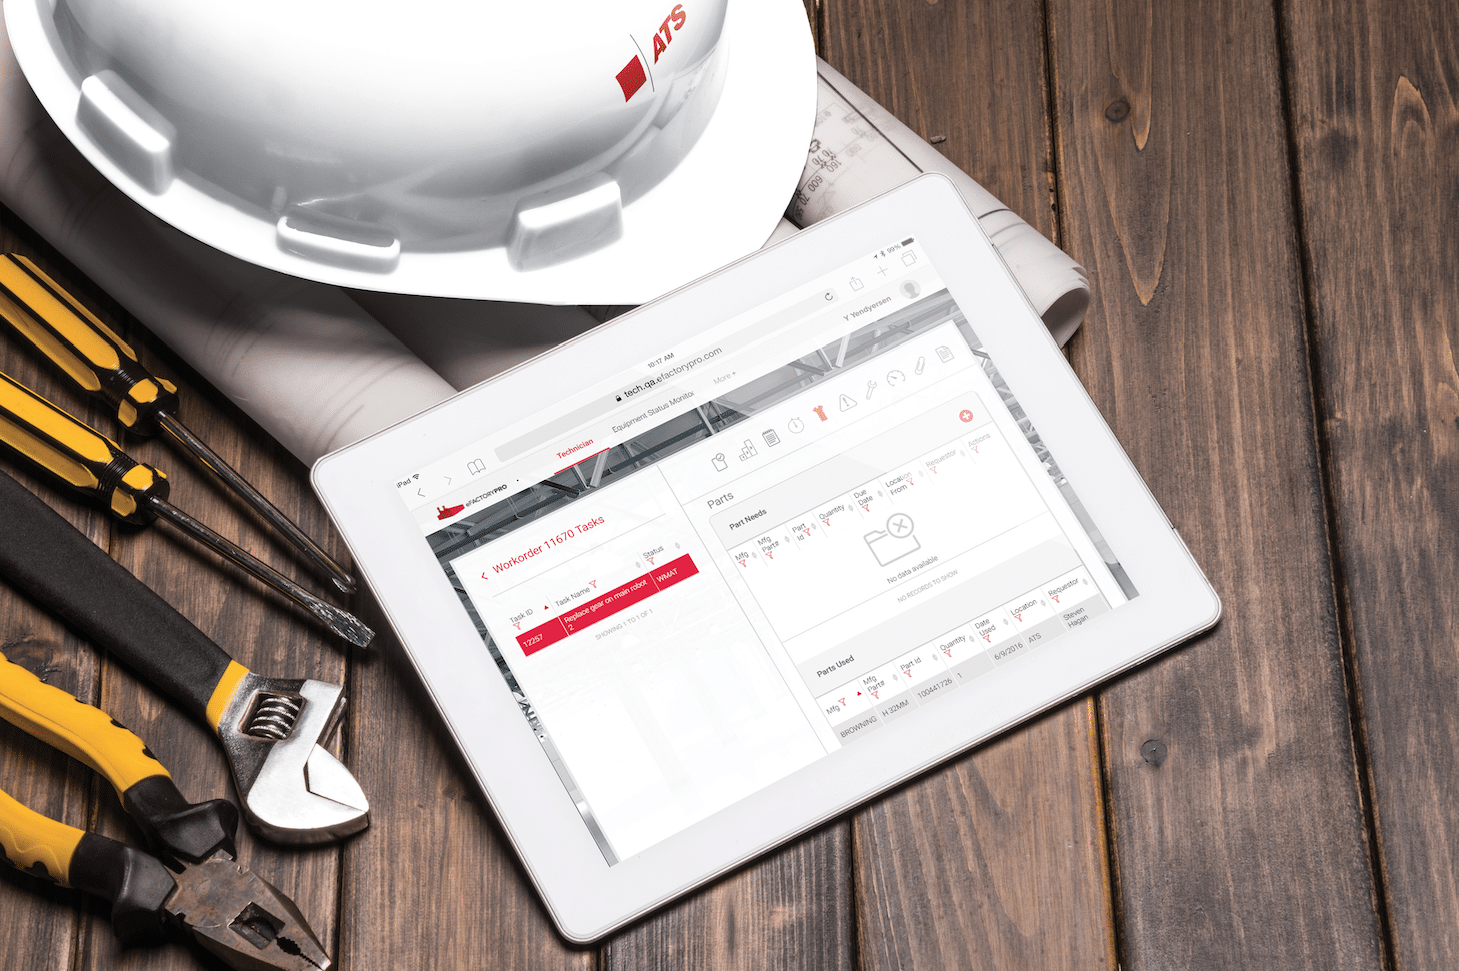 ATS hard hat, tablet, tools and rolled documents.